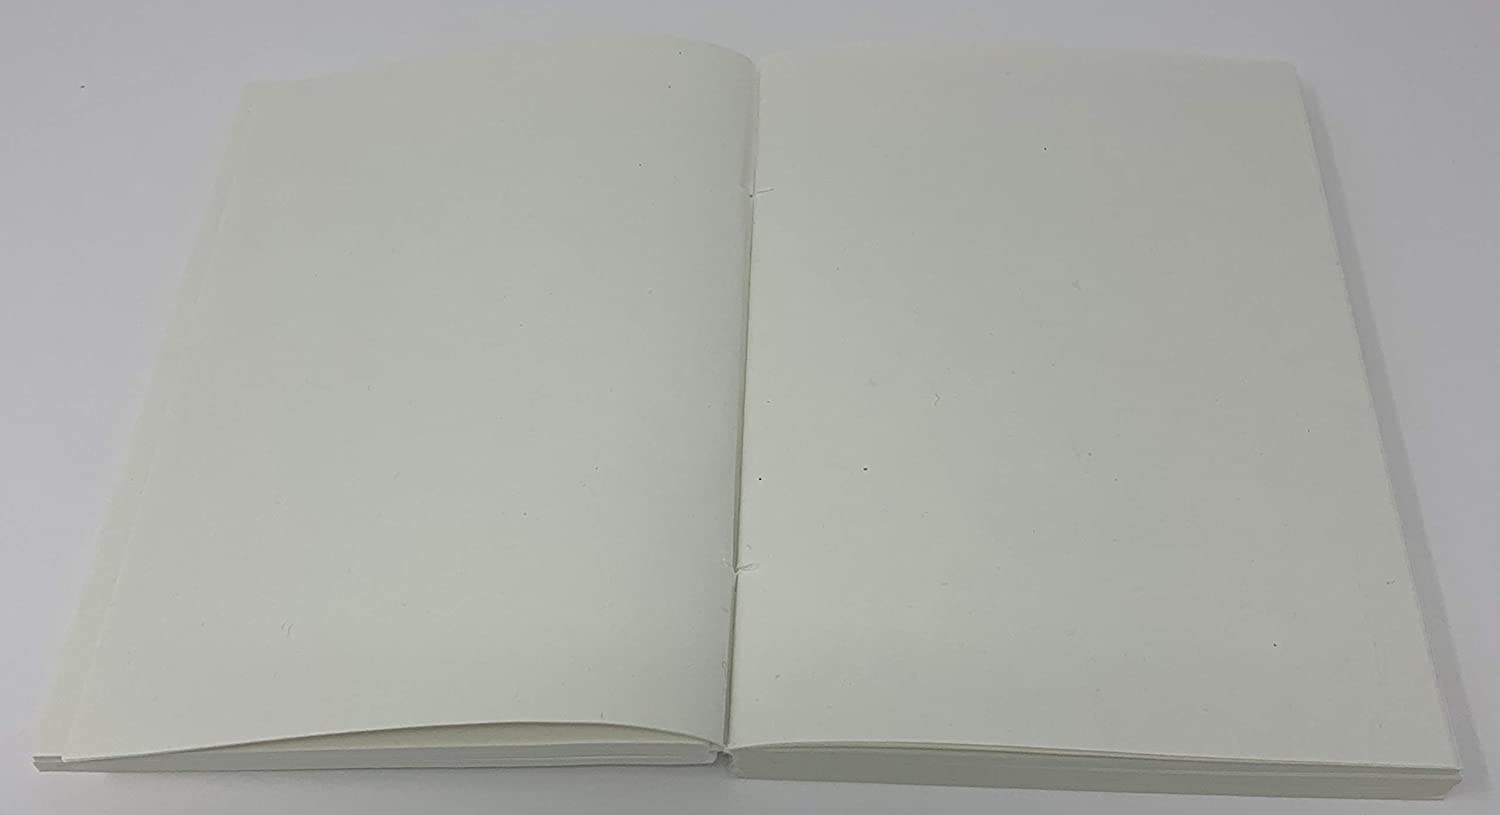 Tuk Tuk Press, Blank Paper Refill, 100% Tree and Acid Free, 125 GSM Thick, Recycled Blank Cotton Pages, (8 Inches x 6 Inches)